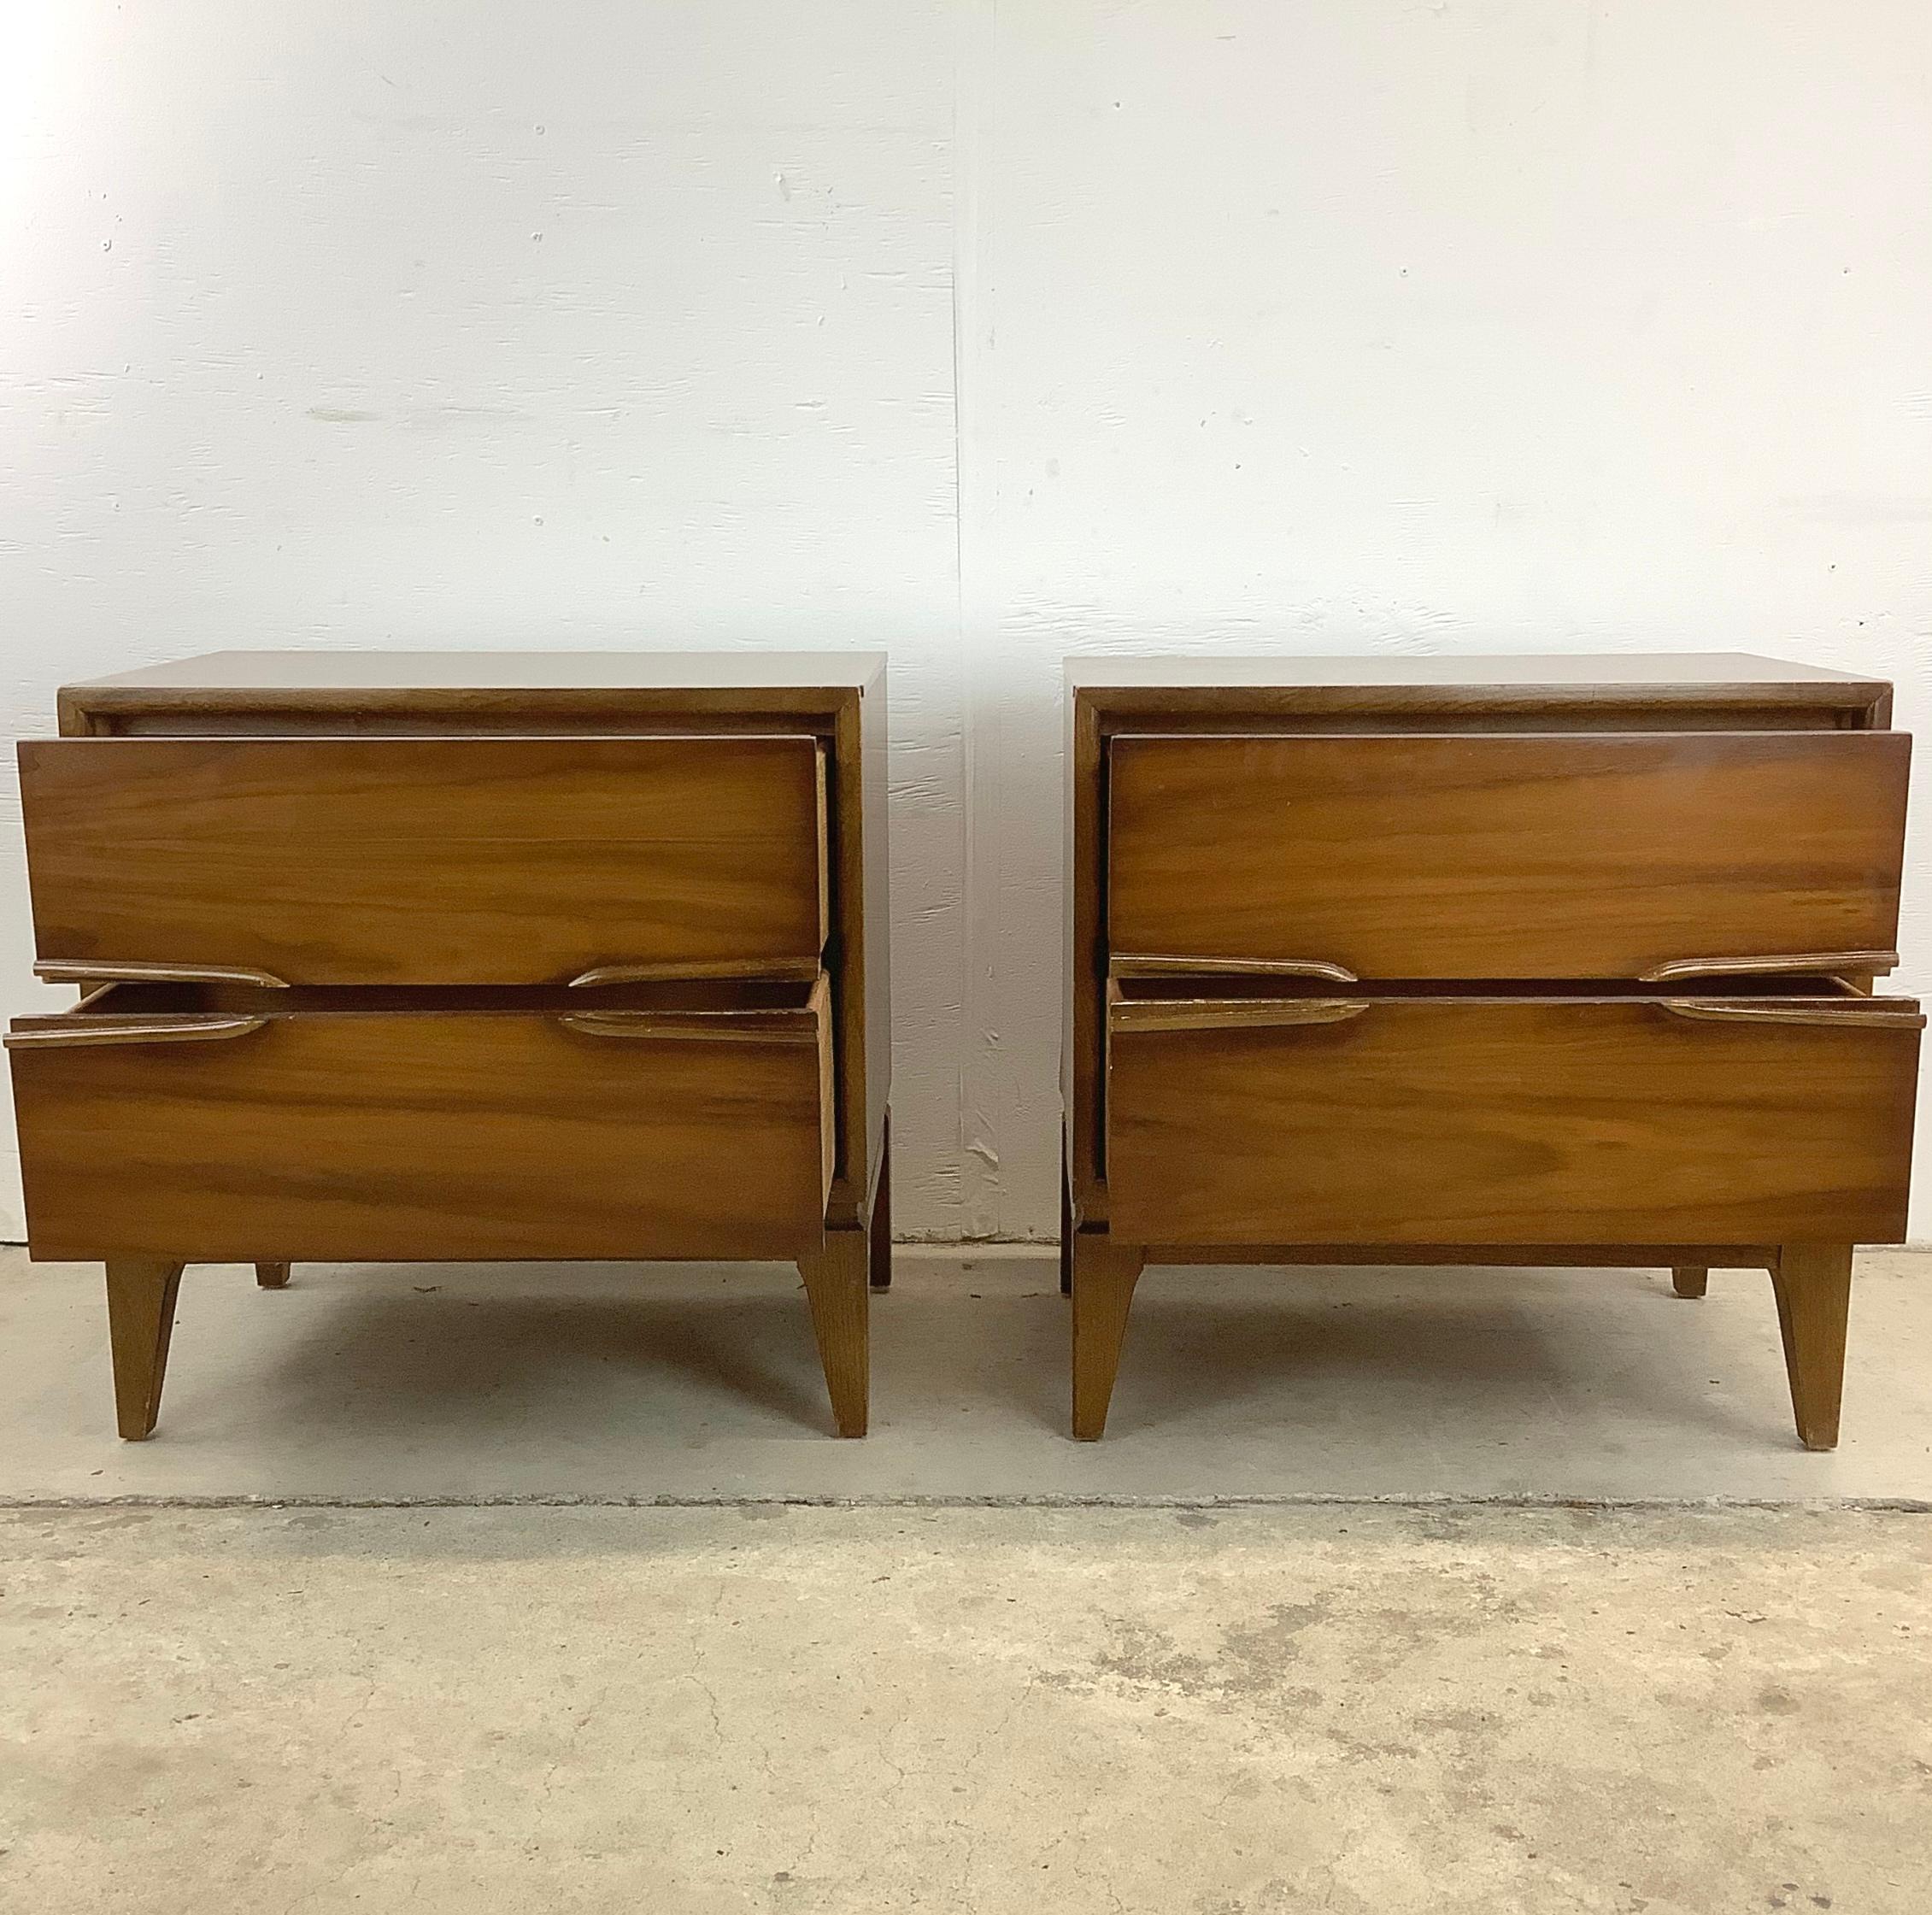 This matched pair of Mid-Century Modern Walnut Two Drawer Nightstands are designed to seamlessly combine both style and functionality. The exquisite pair are crafted with quality mid 20th century quality and plenty of bedside storage-  enhance your